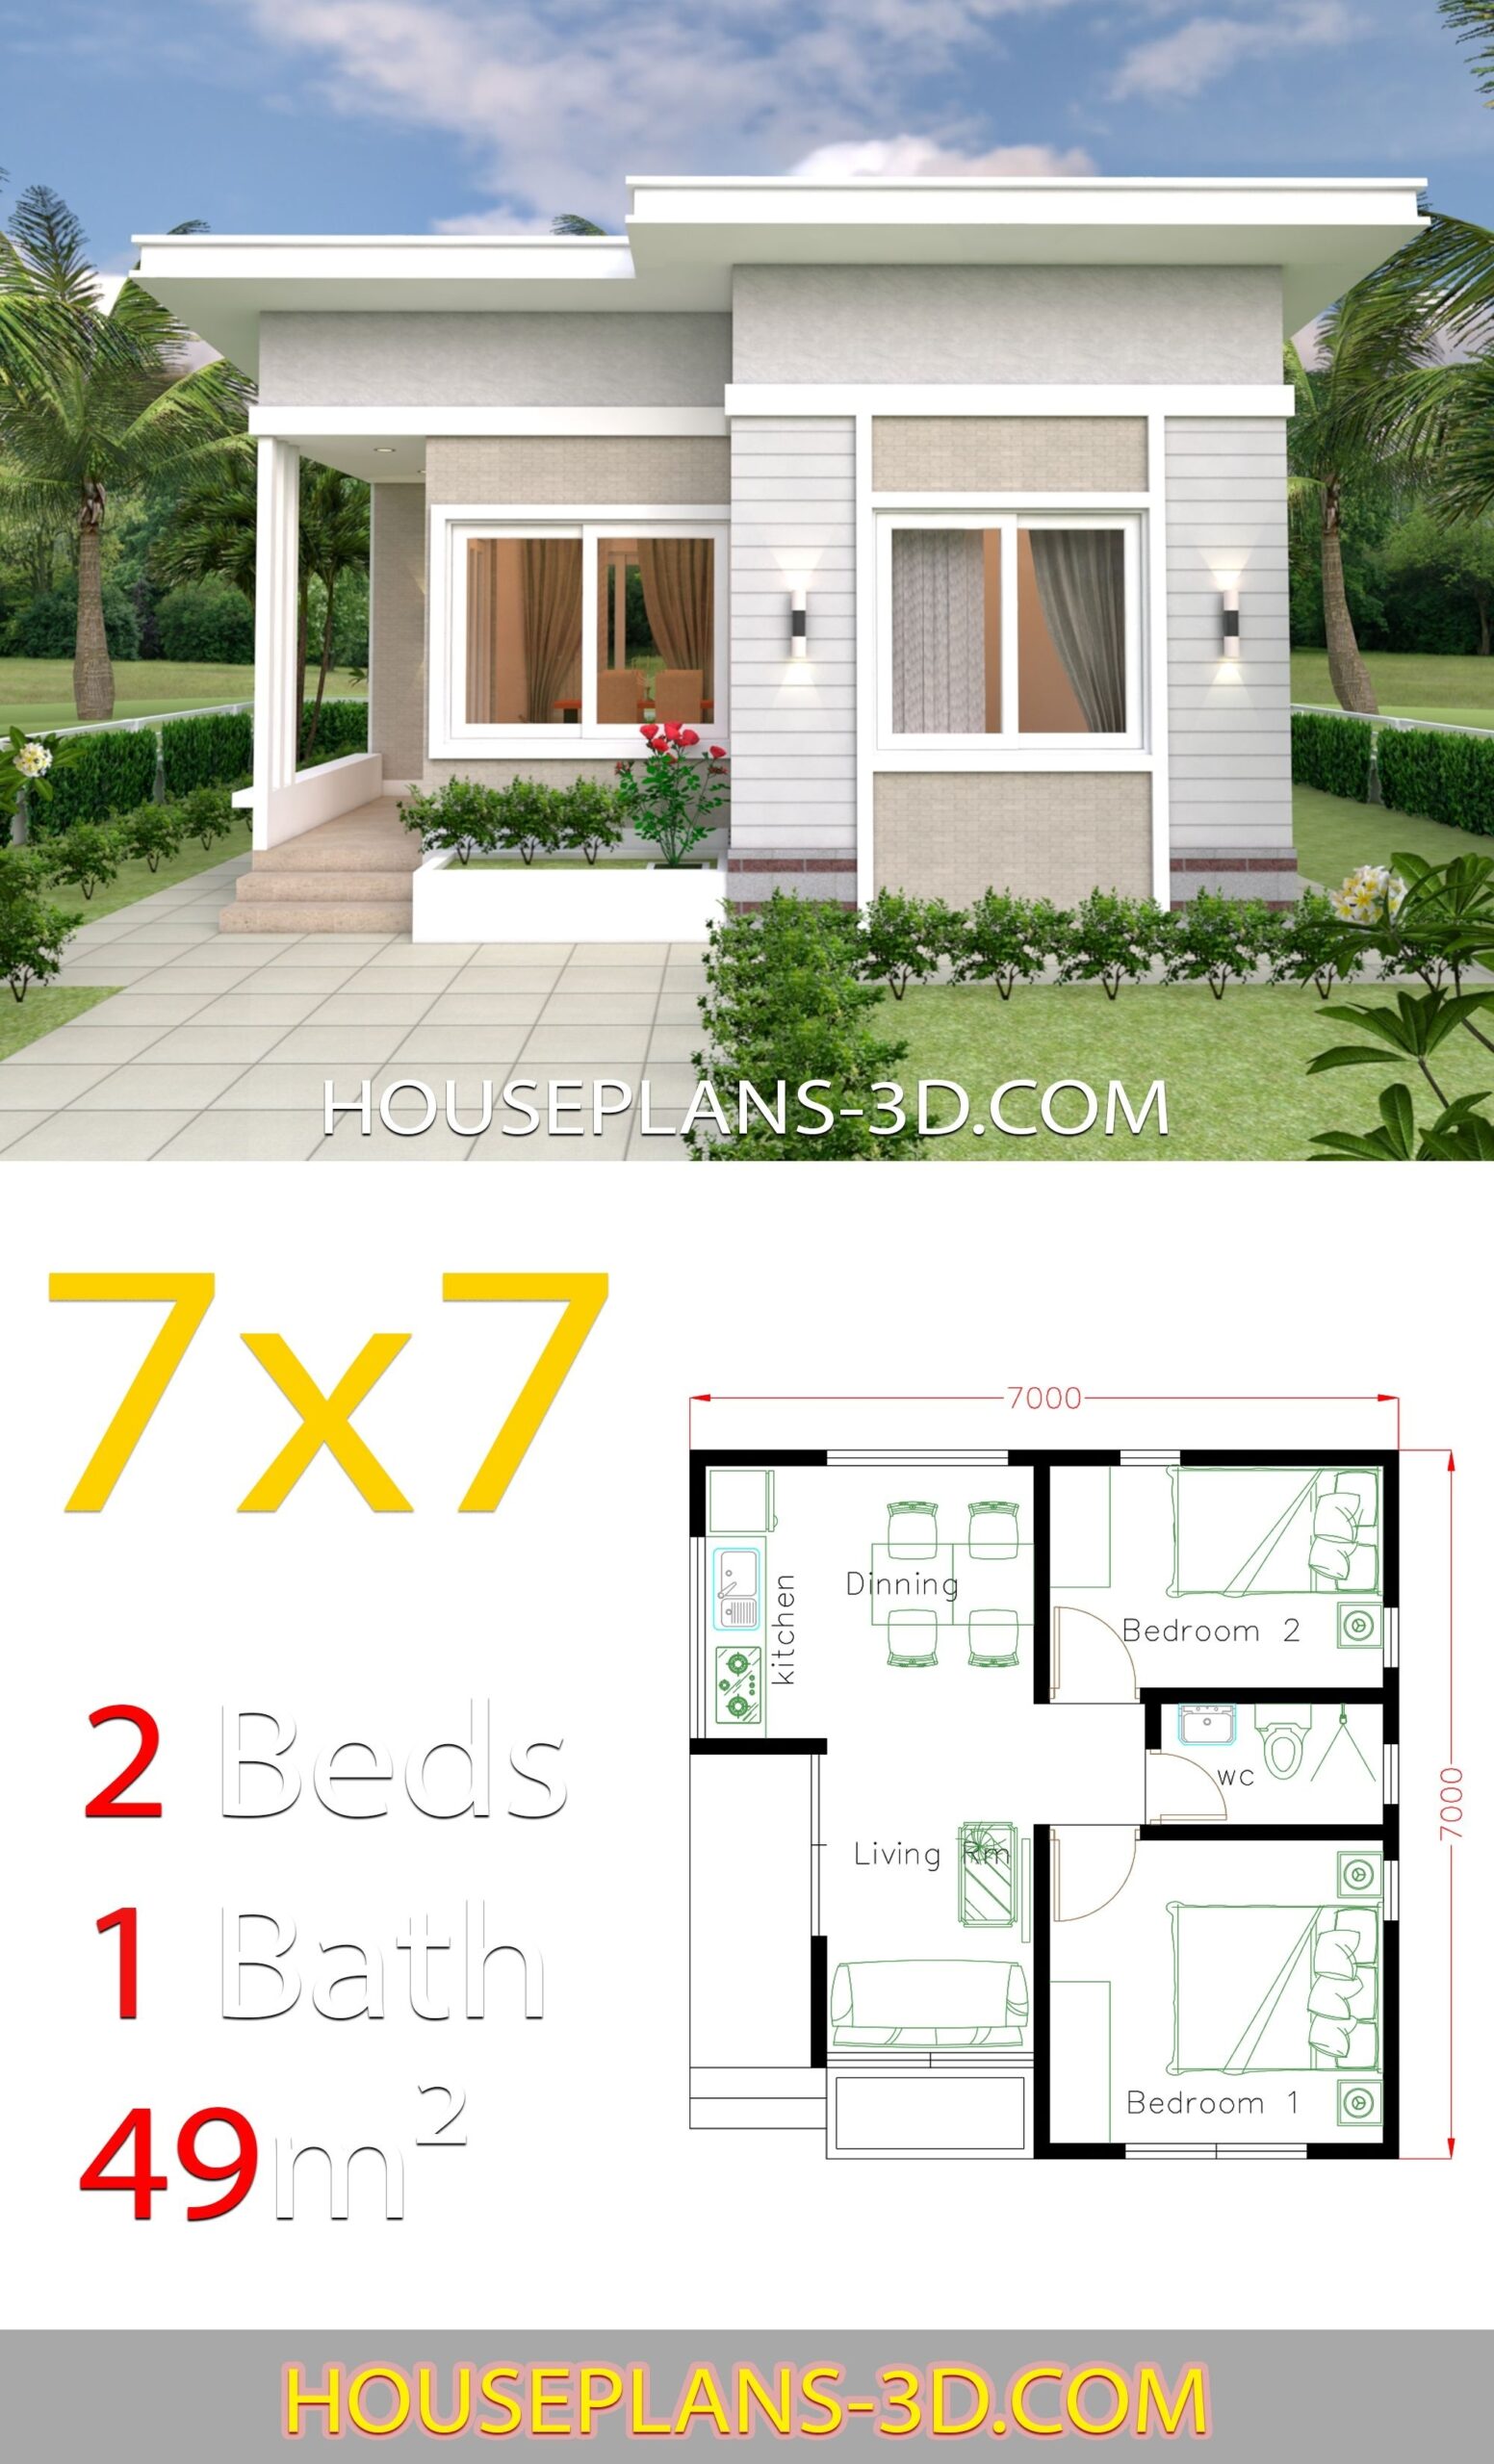 Good small house design 7x7 with 2 bedrooms house plans 3d | small house inside splendid 2bedrooms house with an upper floor